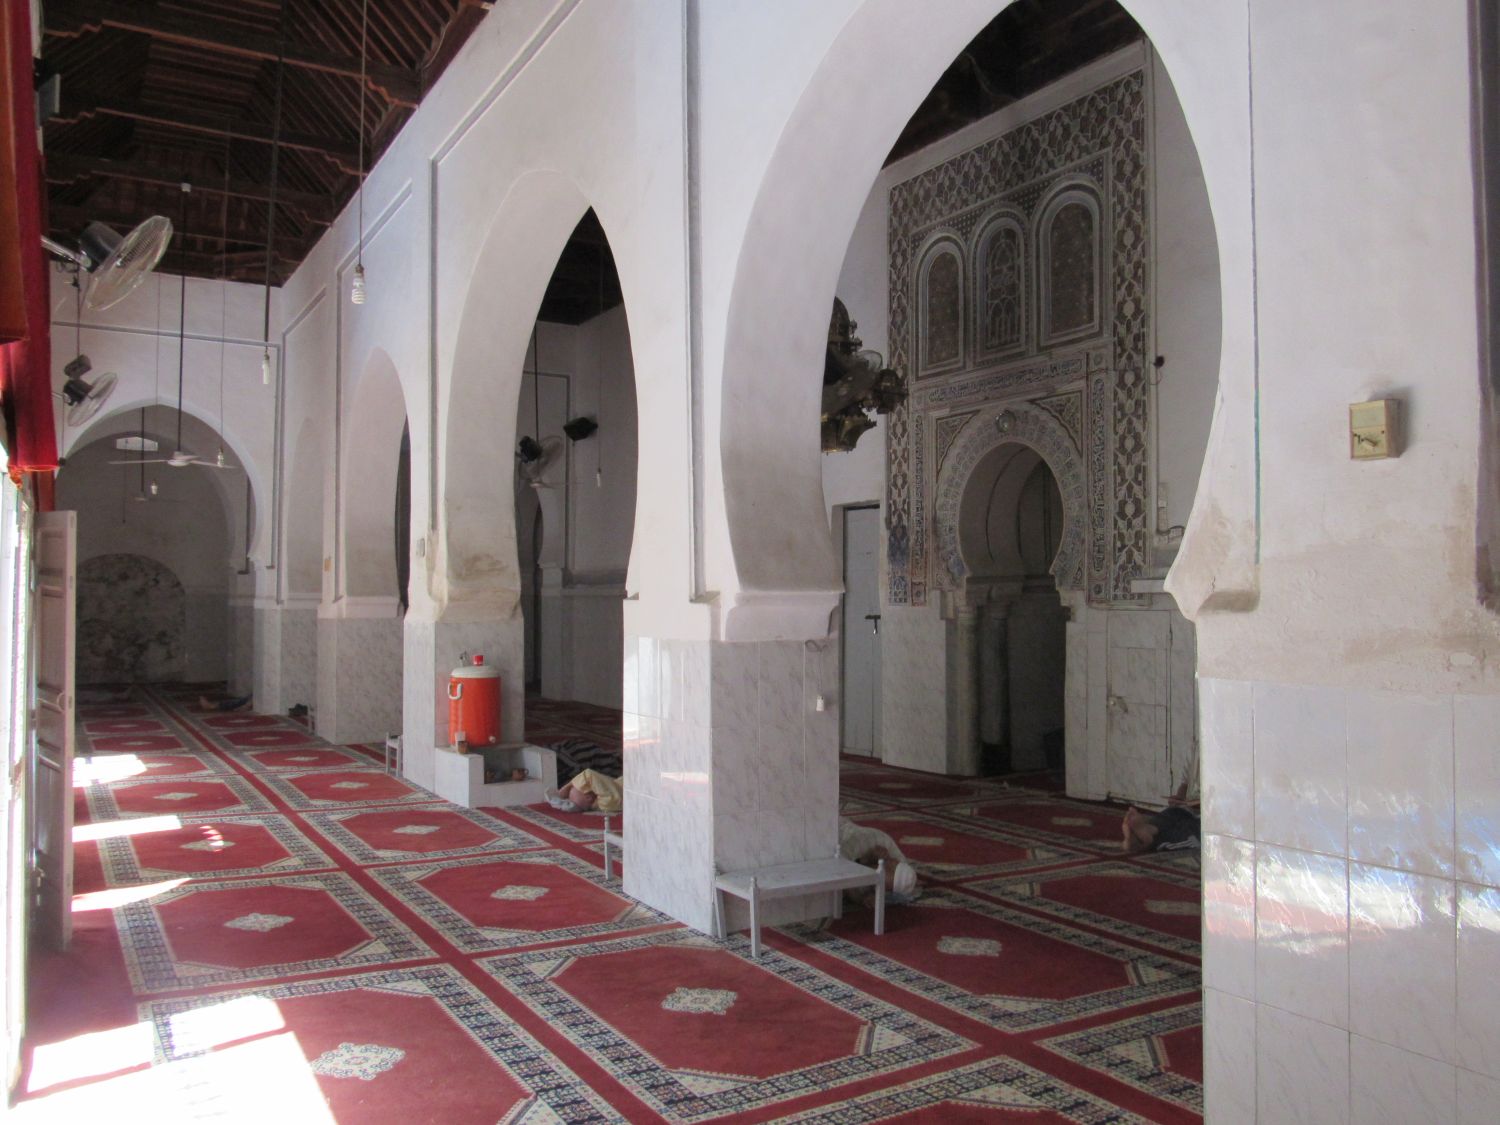 Interior view of the prayer hall, mihrab and qibla wal on the right.